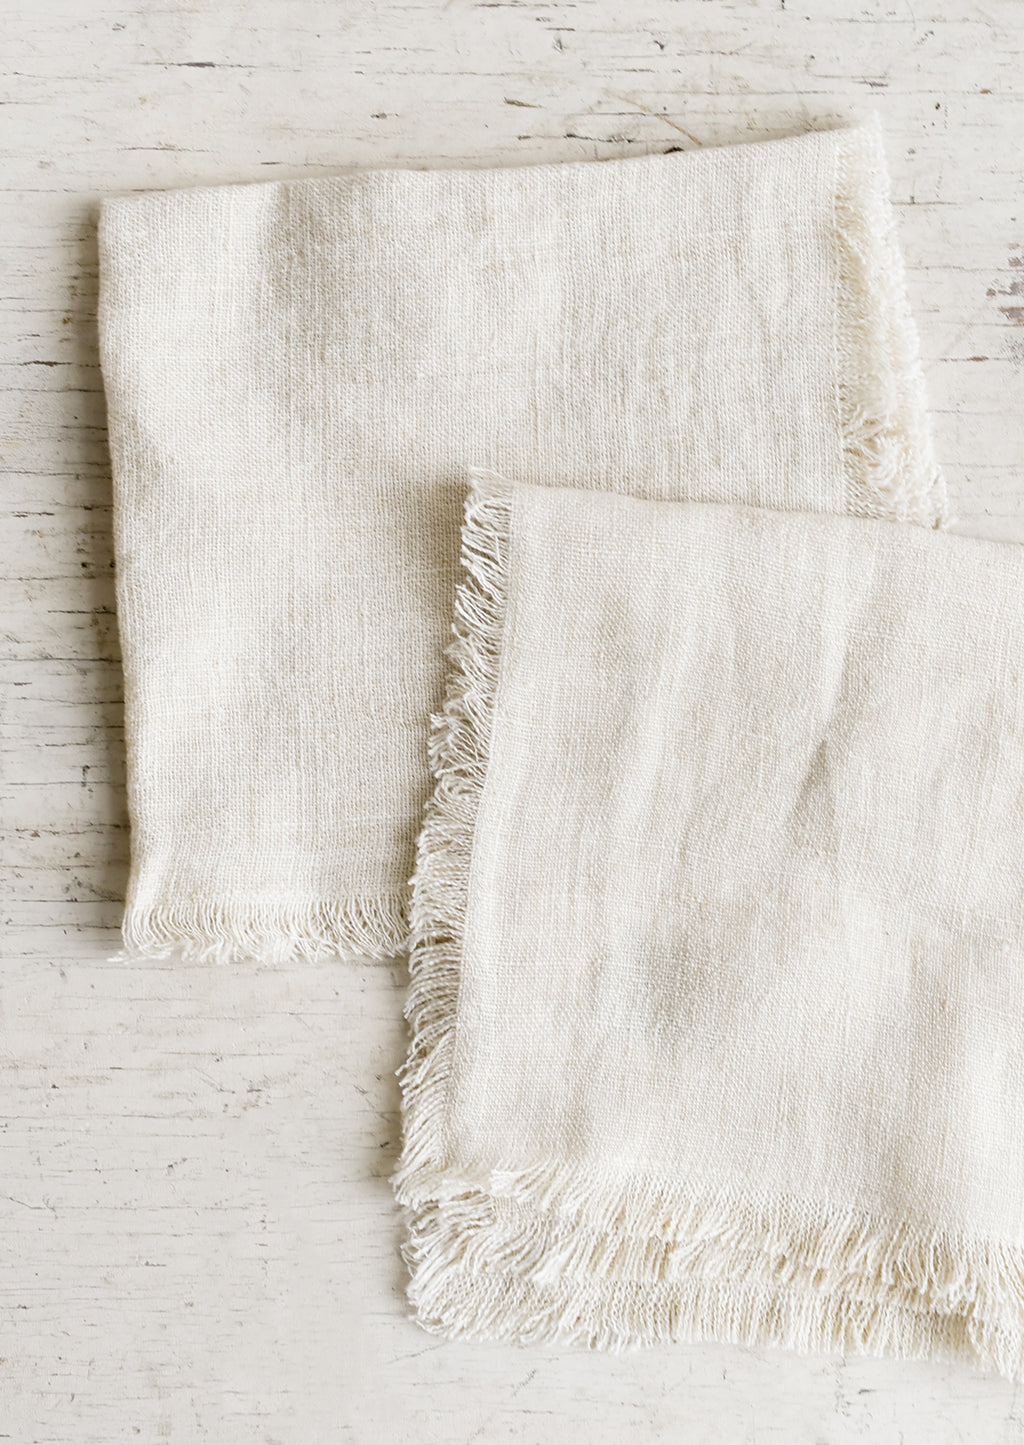 Cream: Folded cream colored linen napkins with frayed edges.